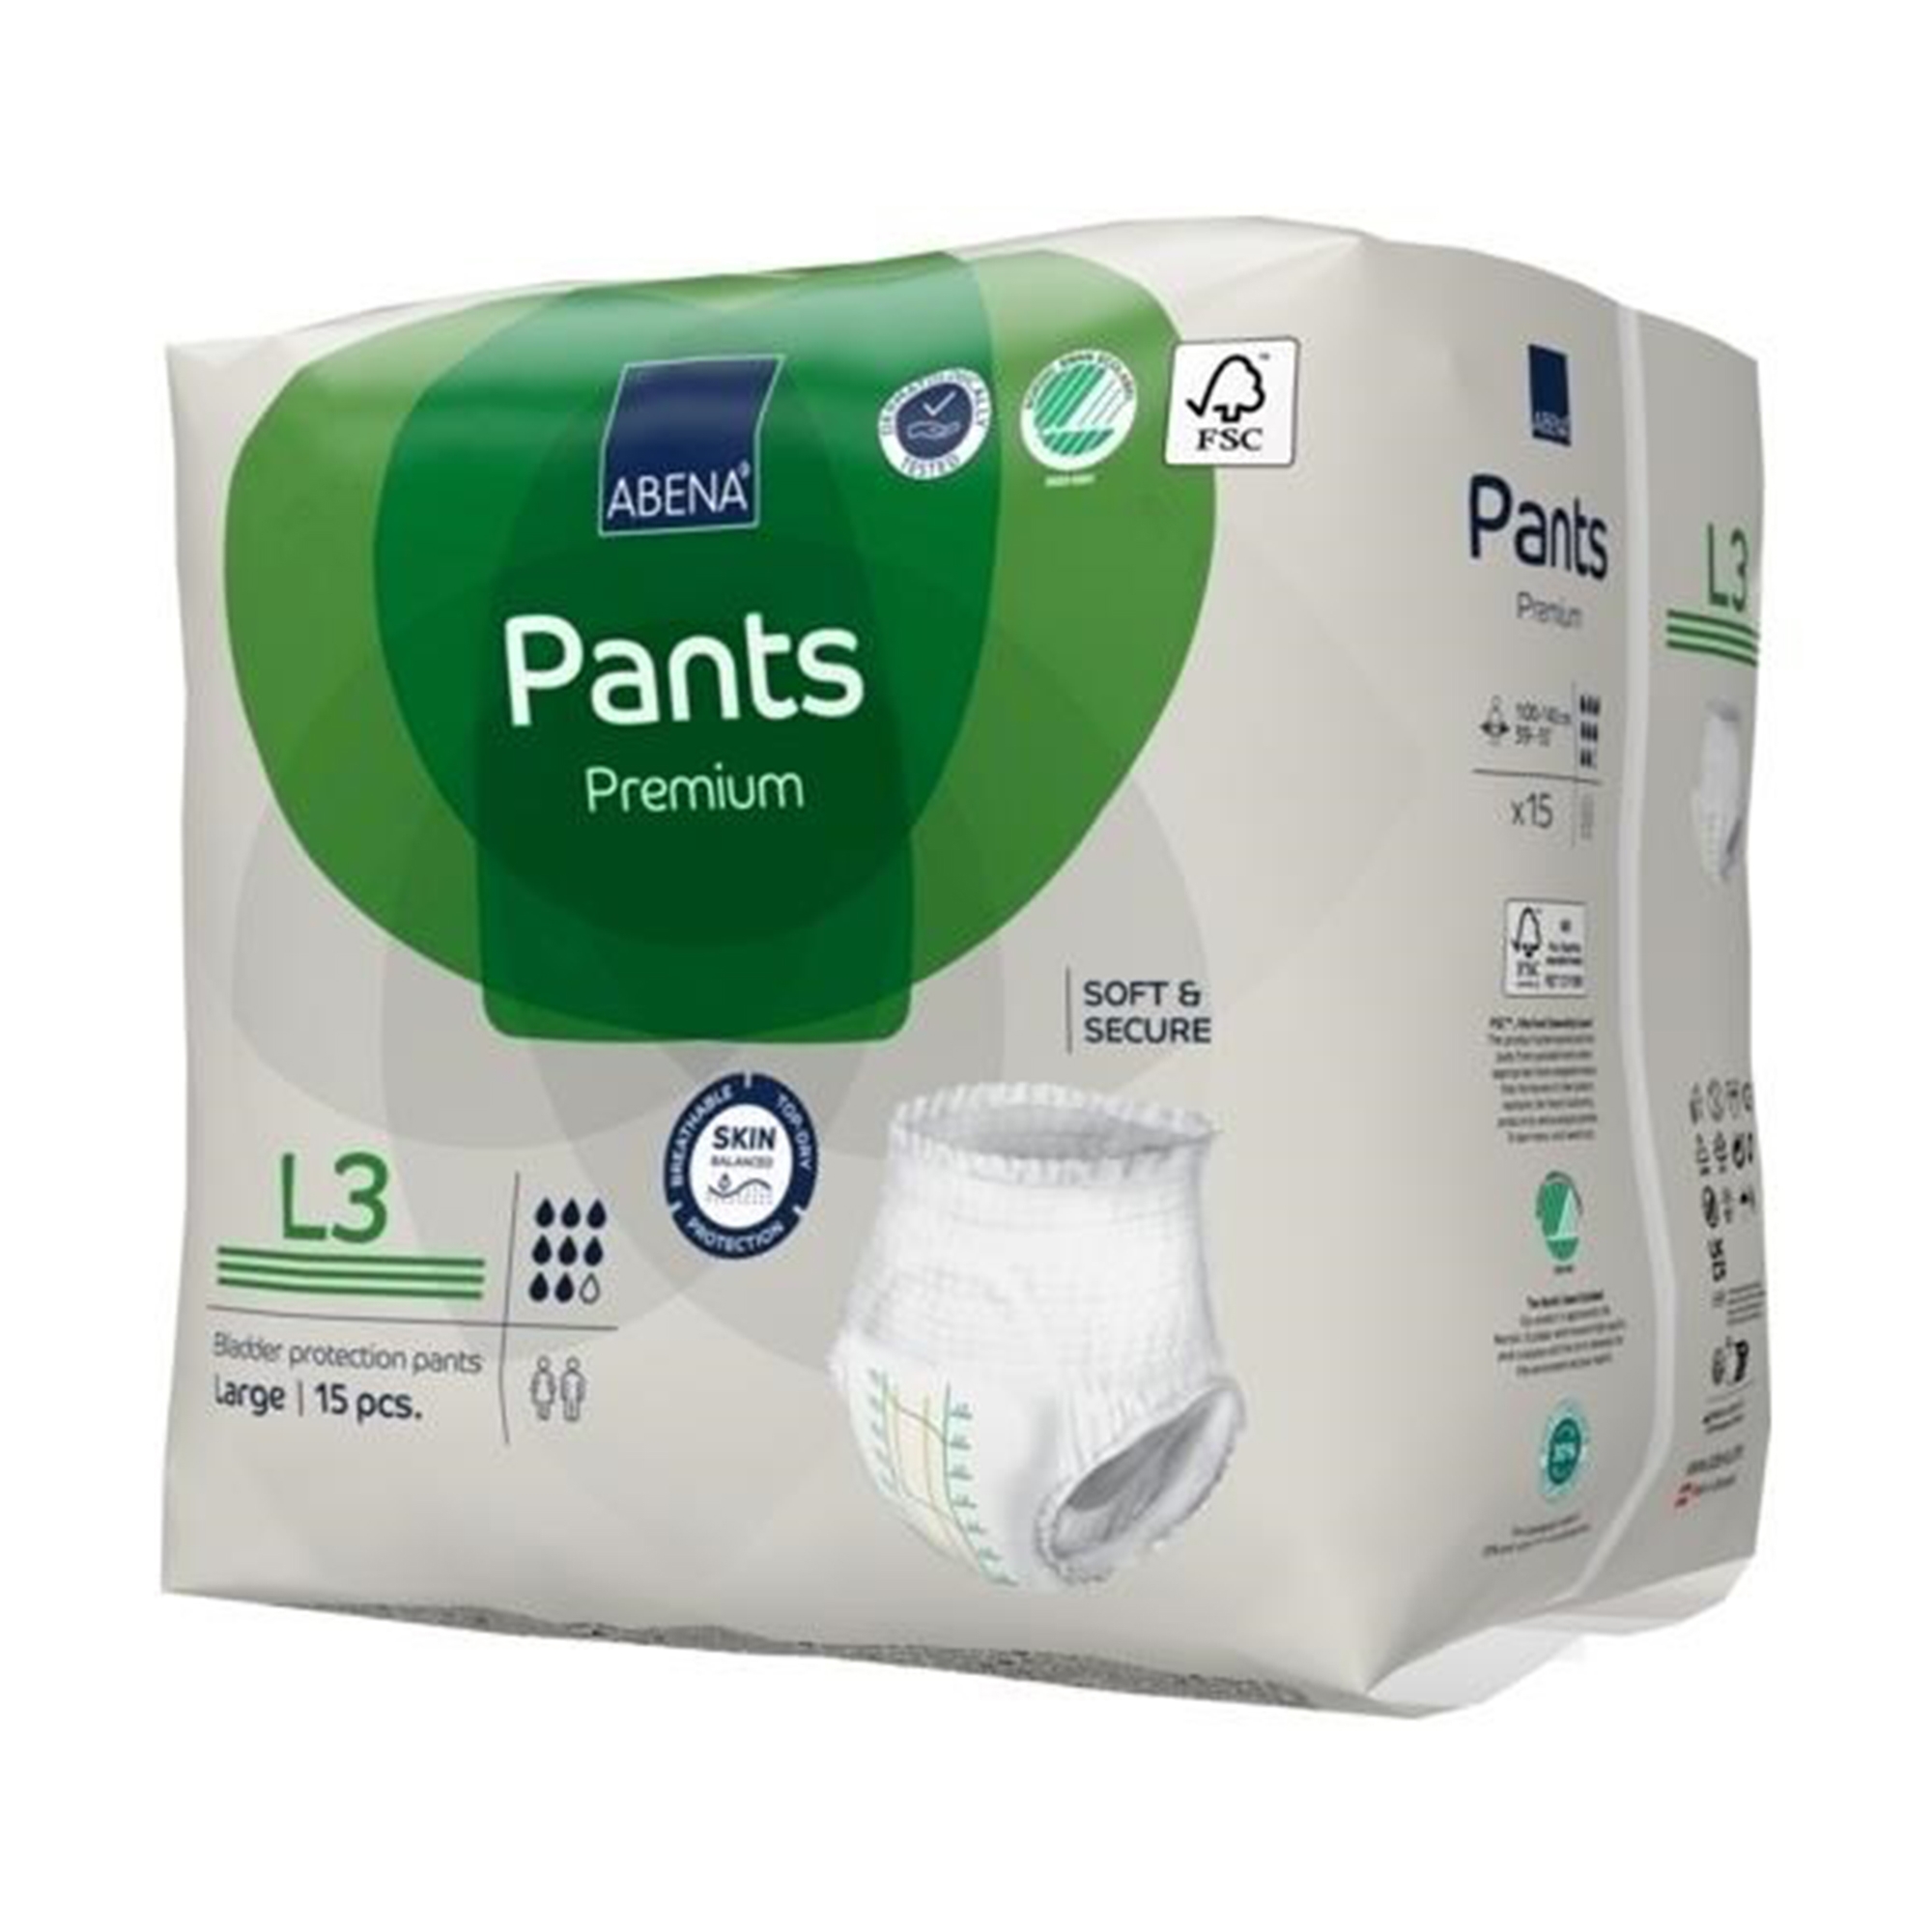 Abena Premium Pants L3 Disposable Underwear Pull On with Tear Away Seams Large, 1000021327, 90 Ct - image 4 of 7